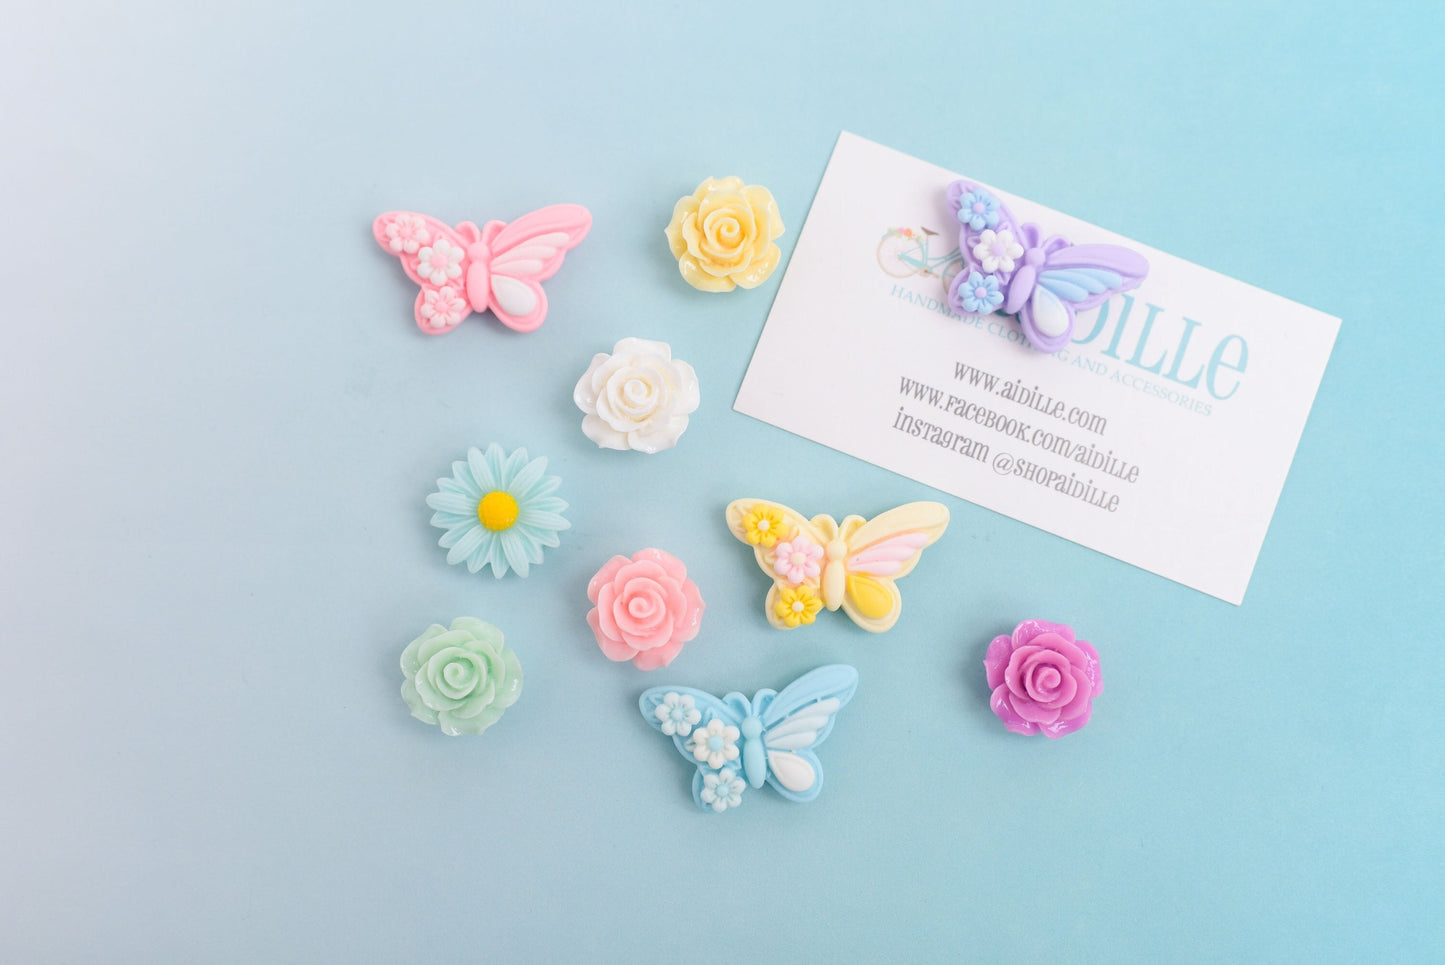 Butterfly and Flower Magnet or Push Pin Set- Set of 10